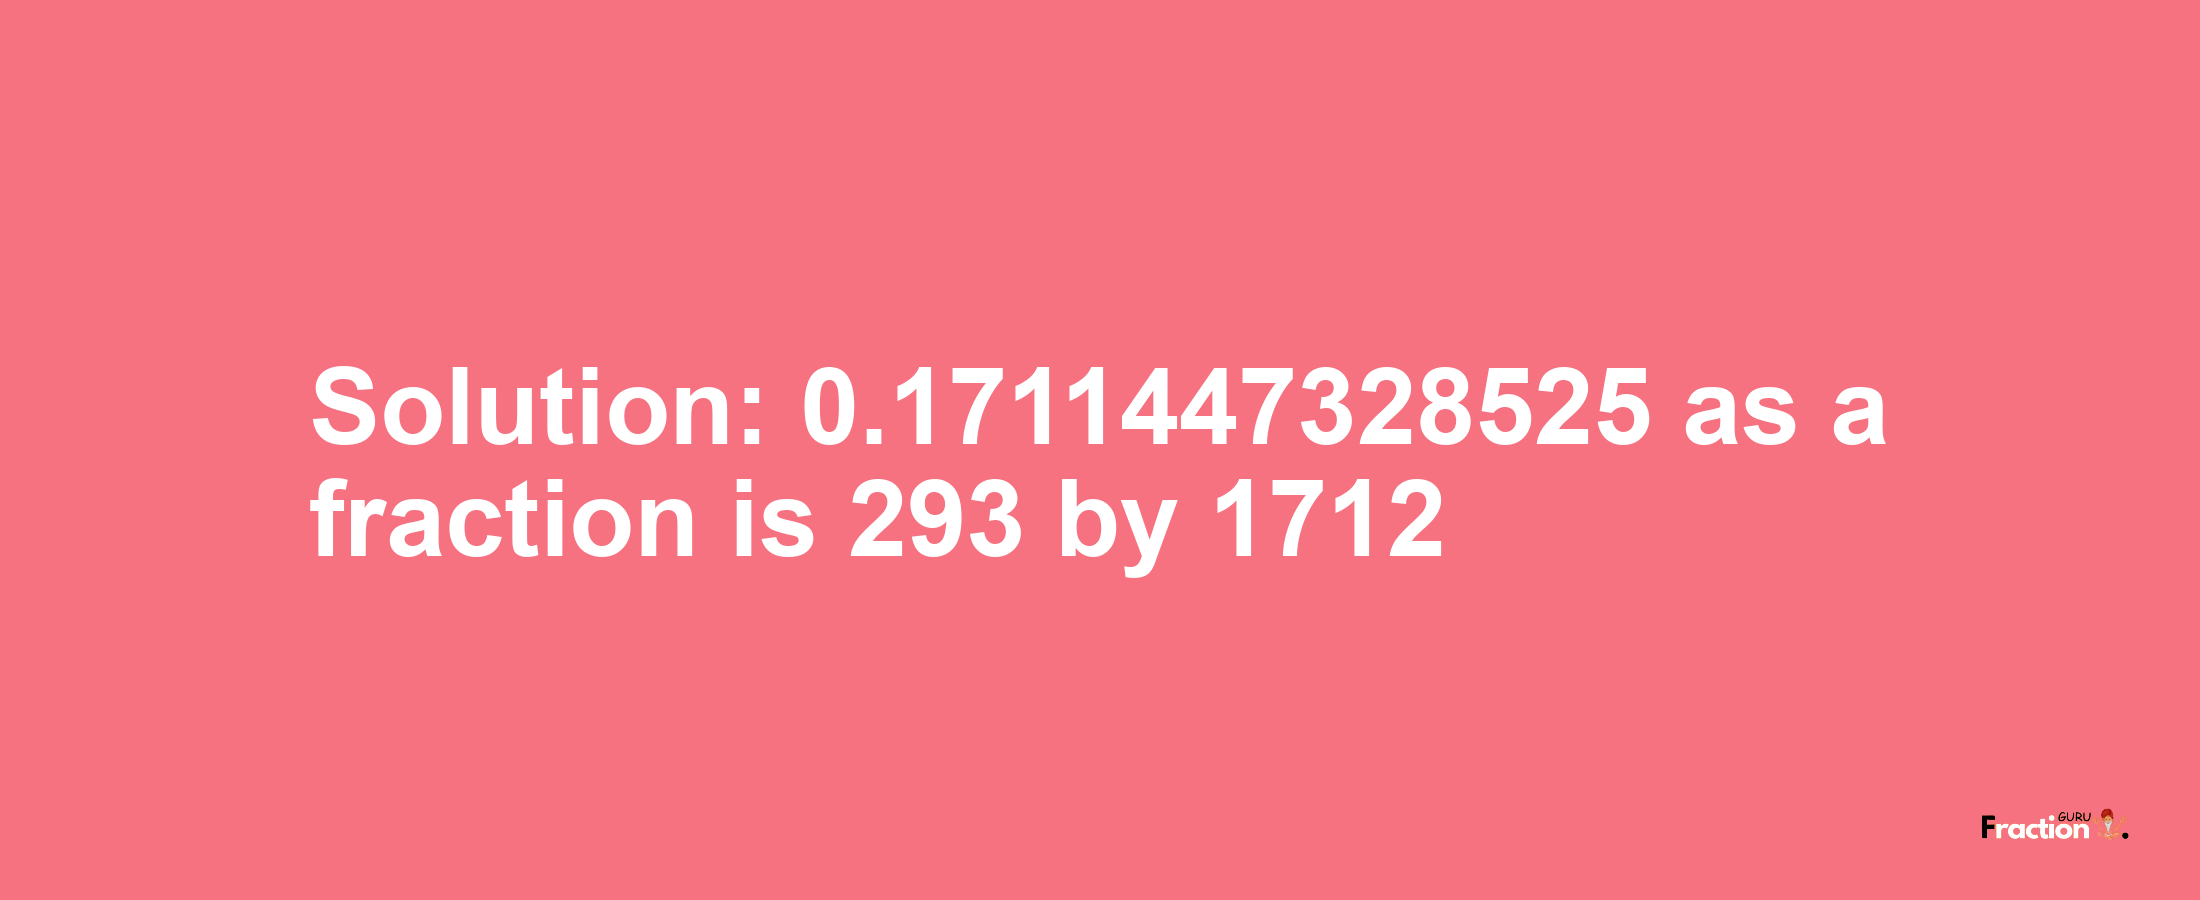 Solution:0.1711447328525 as a fraction is 293/1712